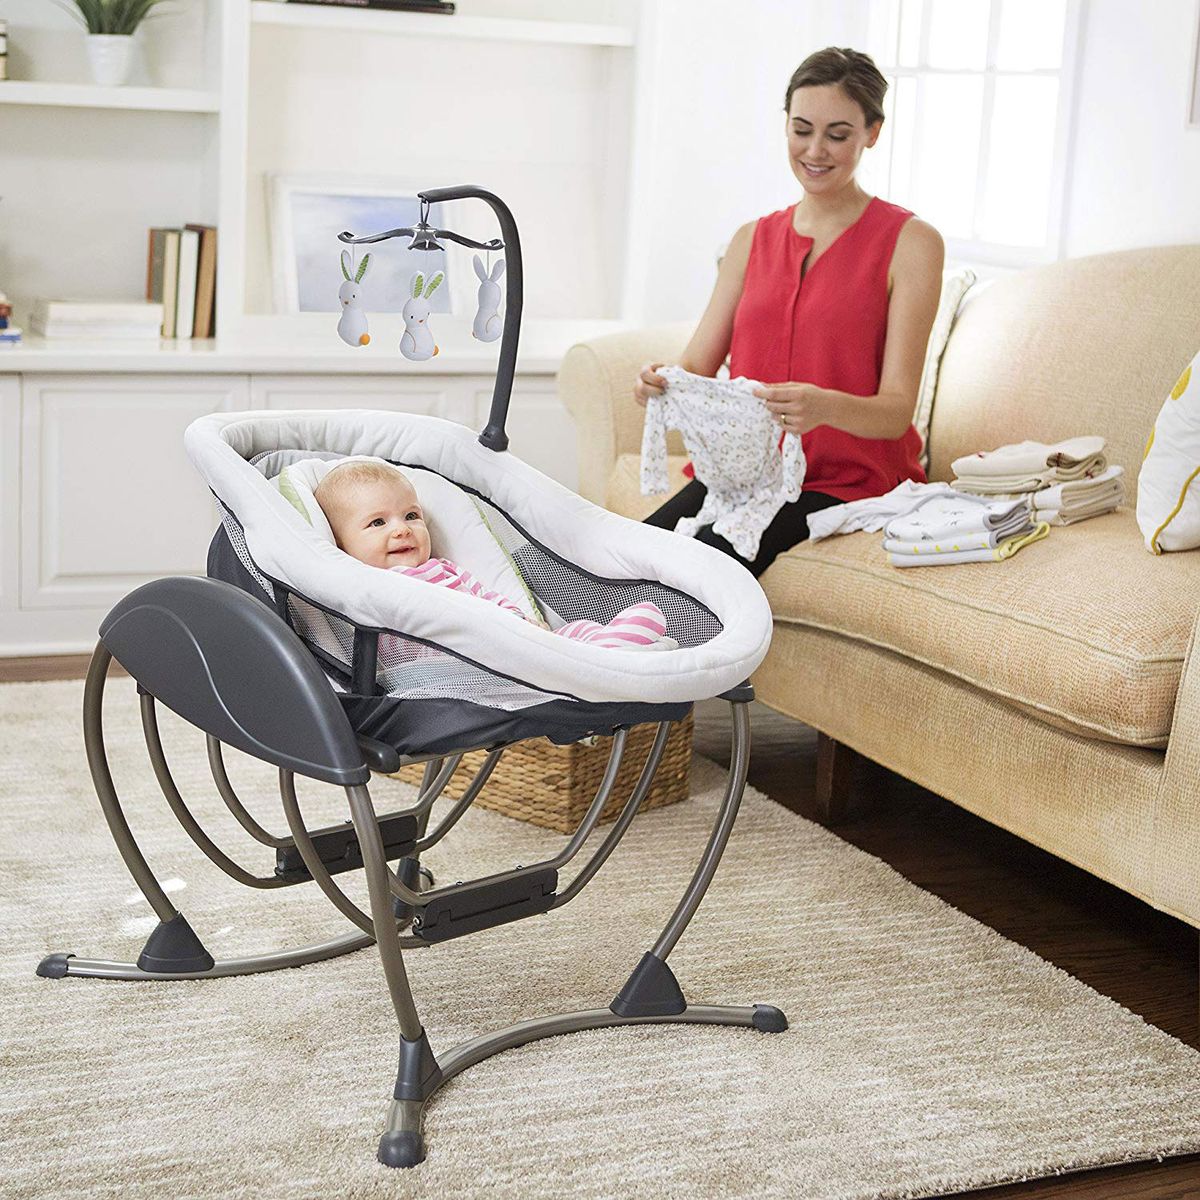 graco dreamglider swing and bassinet